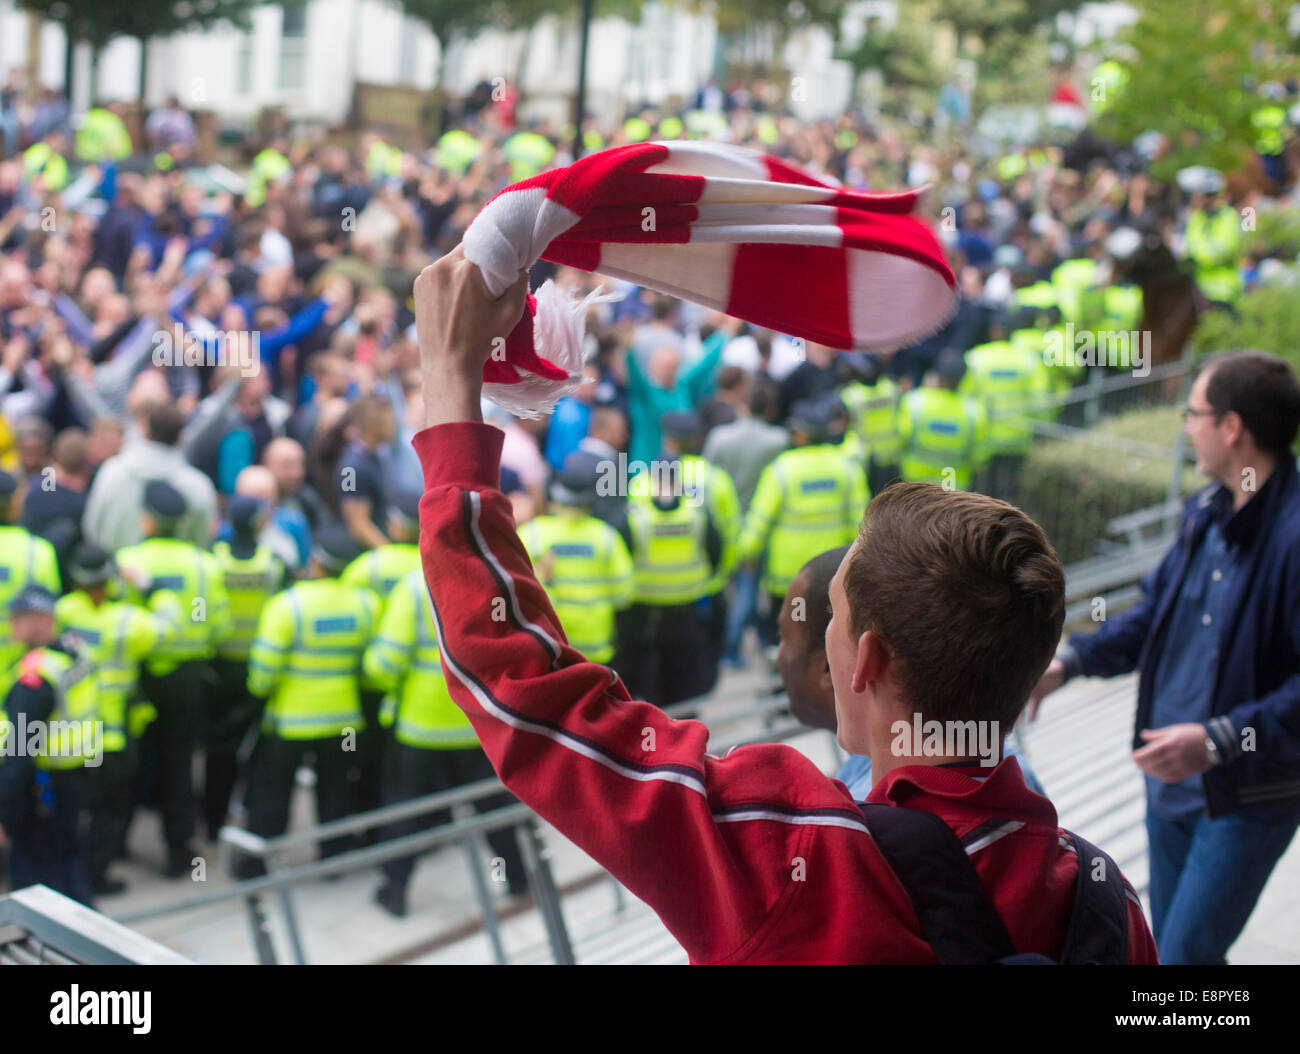 Spurs fans escorted police derby match Arsenal crowd Stock Photo